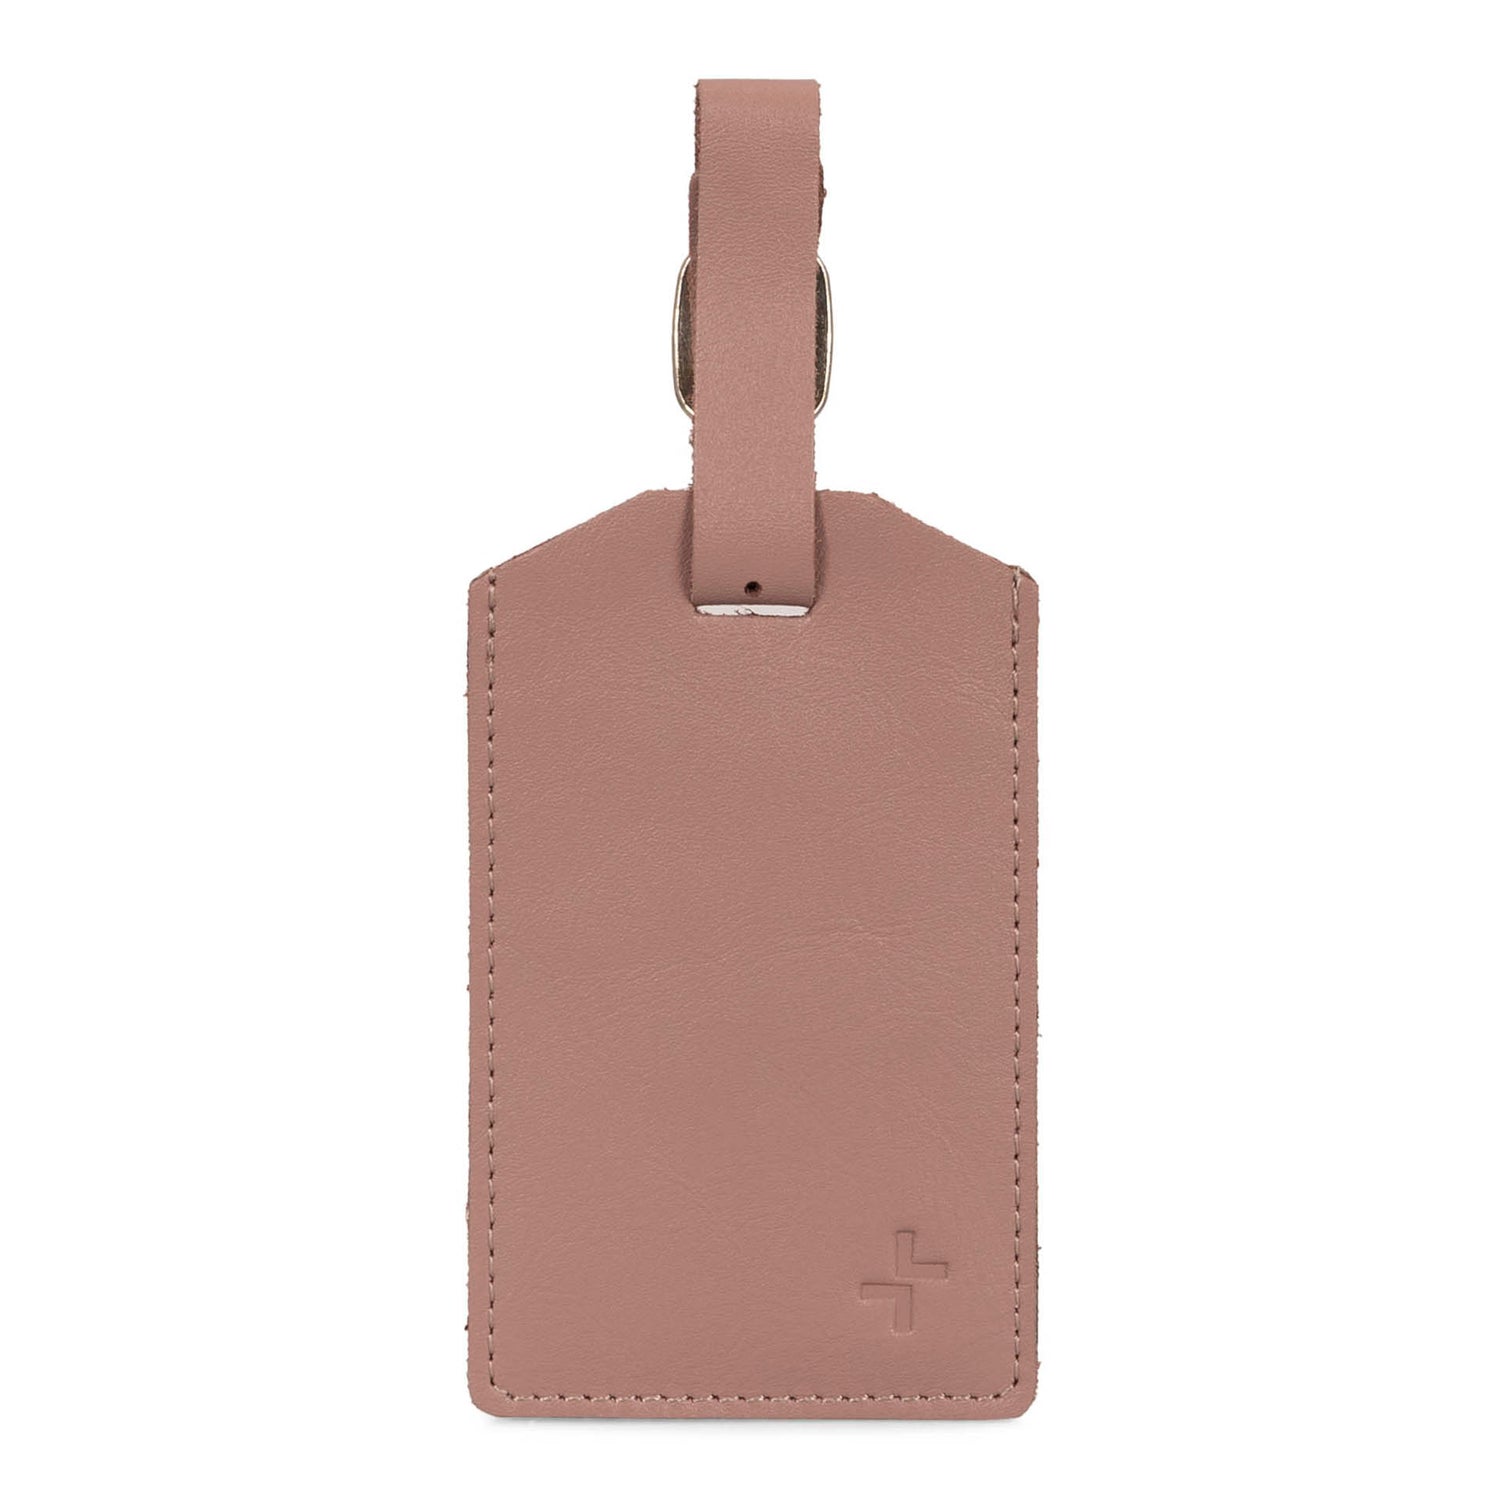 Back side of a pink coloured leather luggage tag designed by Tracker showing its supple texture and strap.